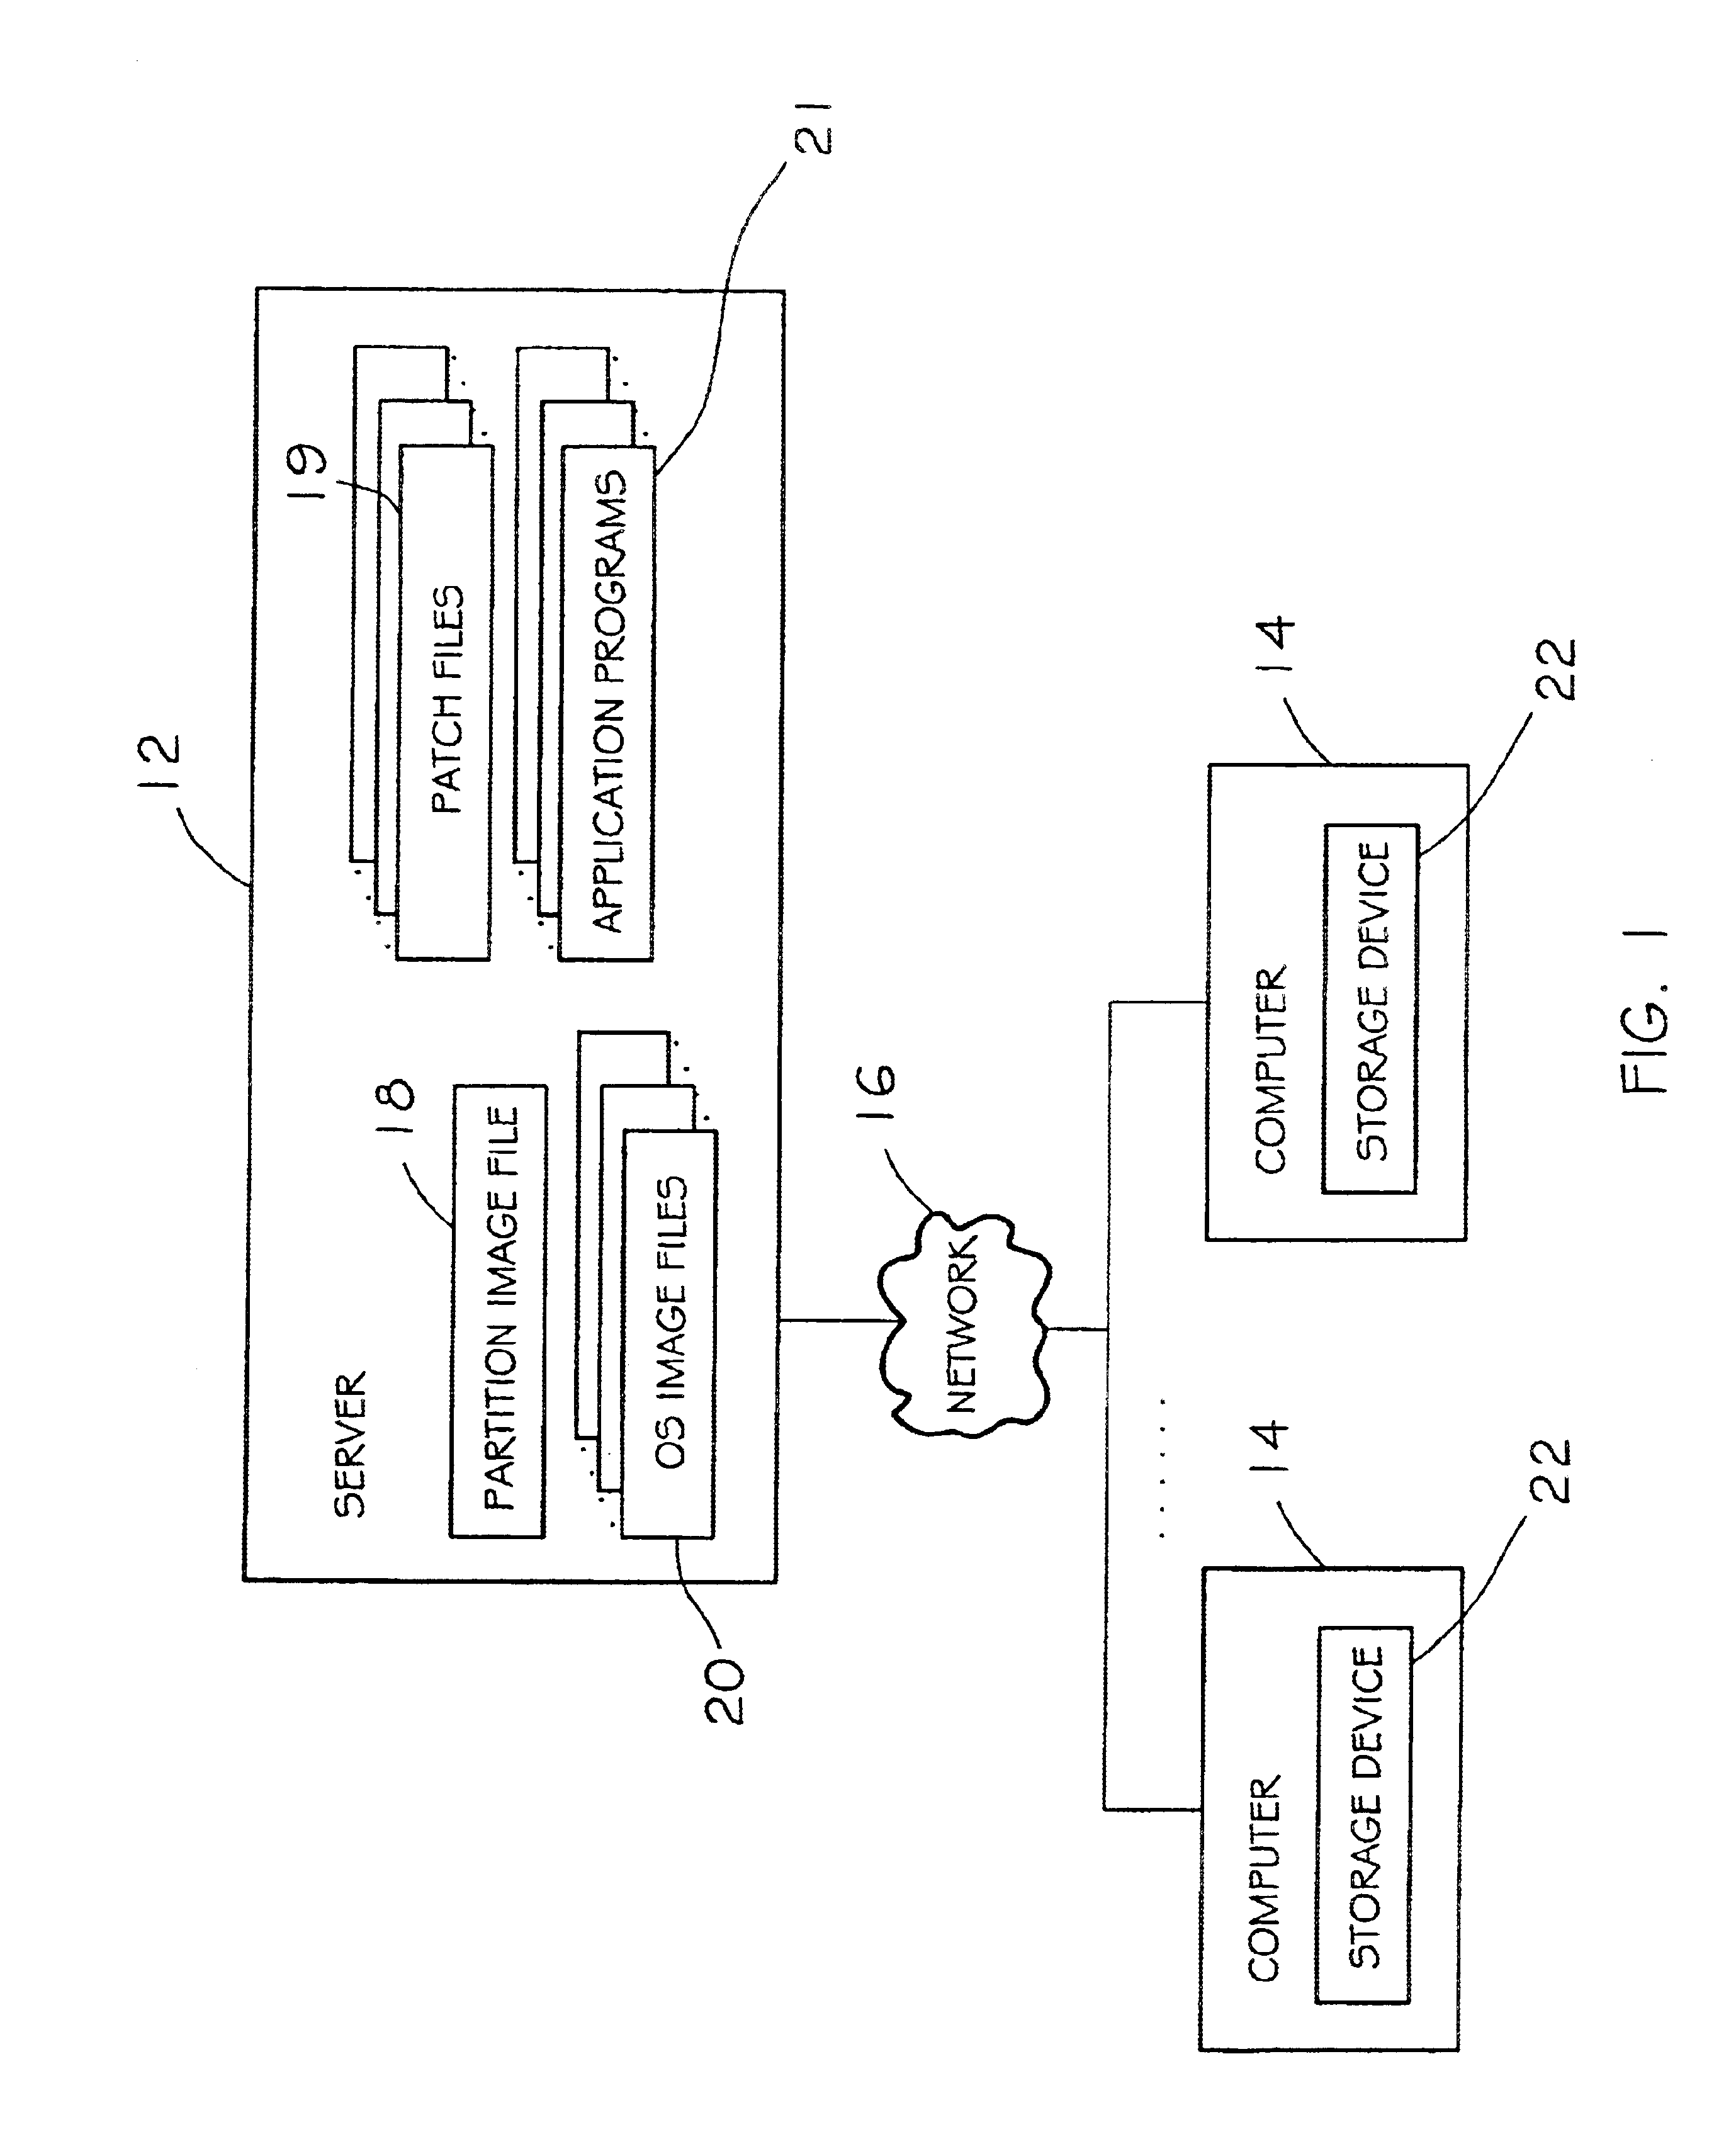 Method for software installation and pre-setup